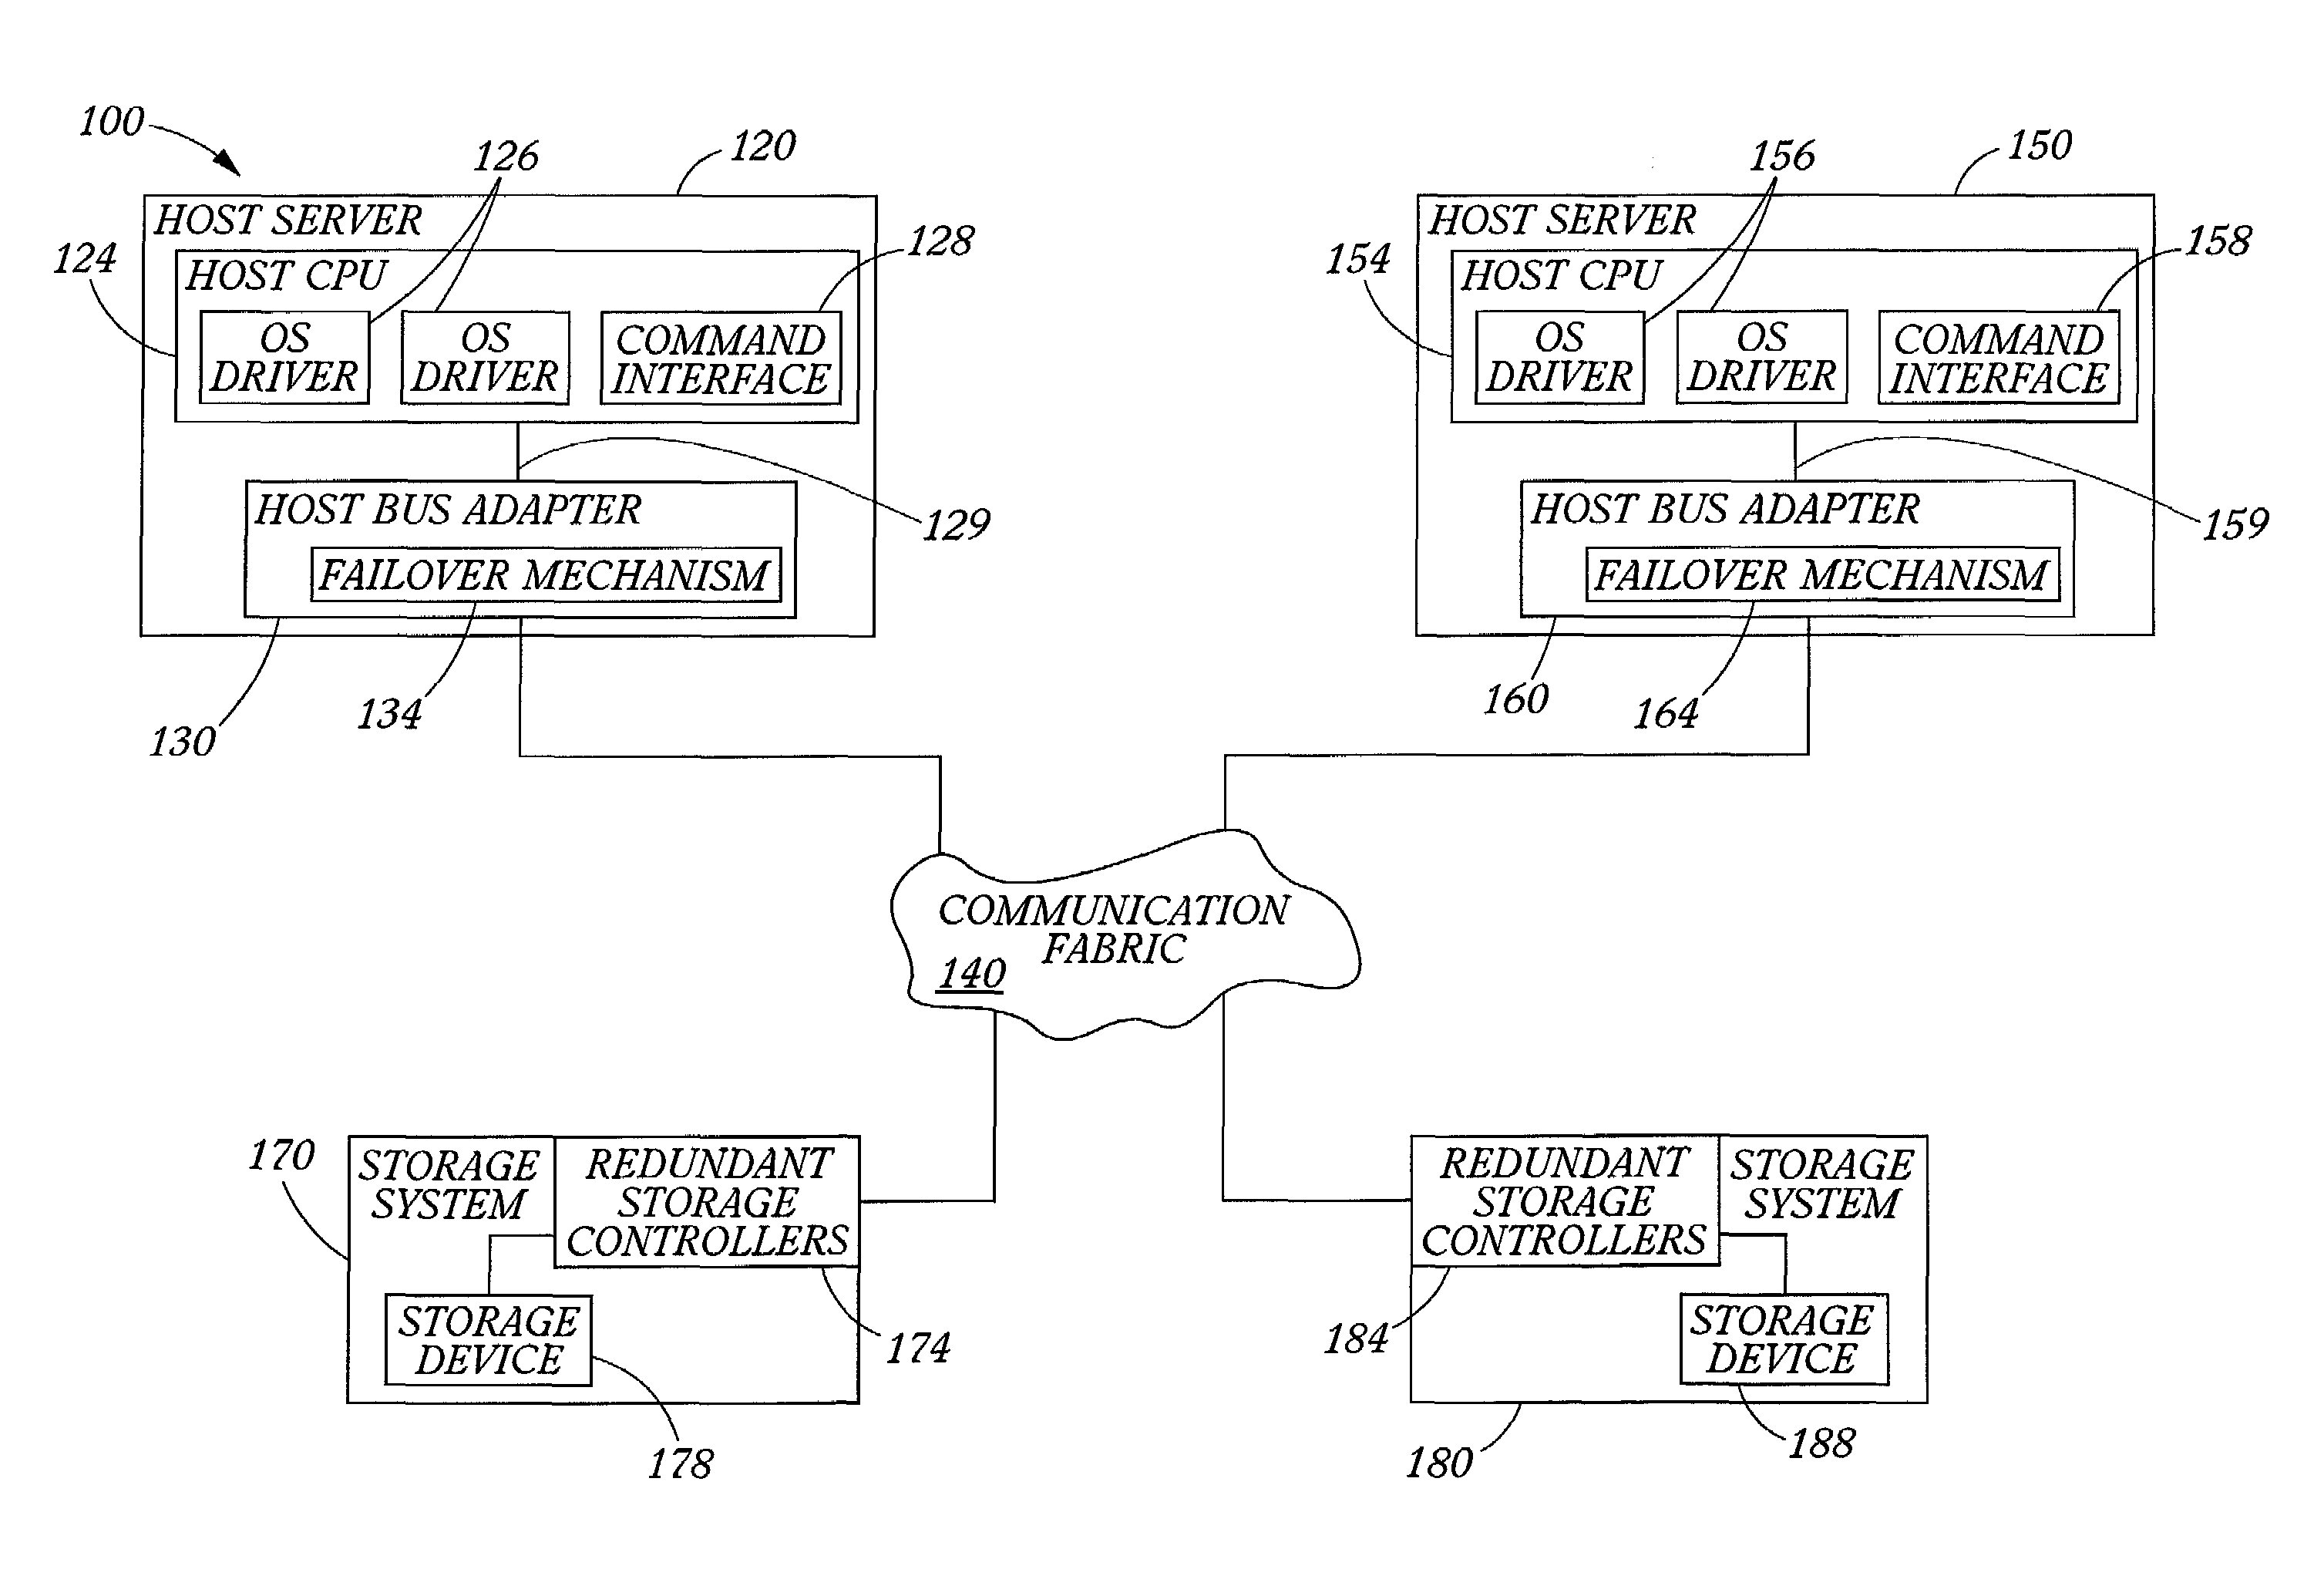 Data storage network with host transparent failover controlled by host bus adapter